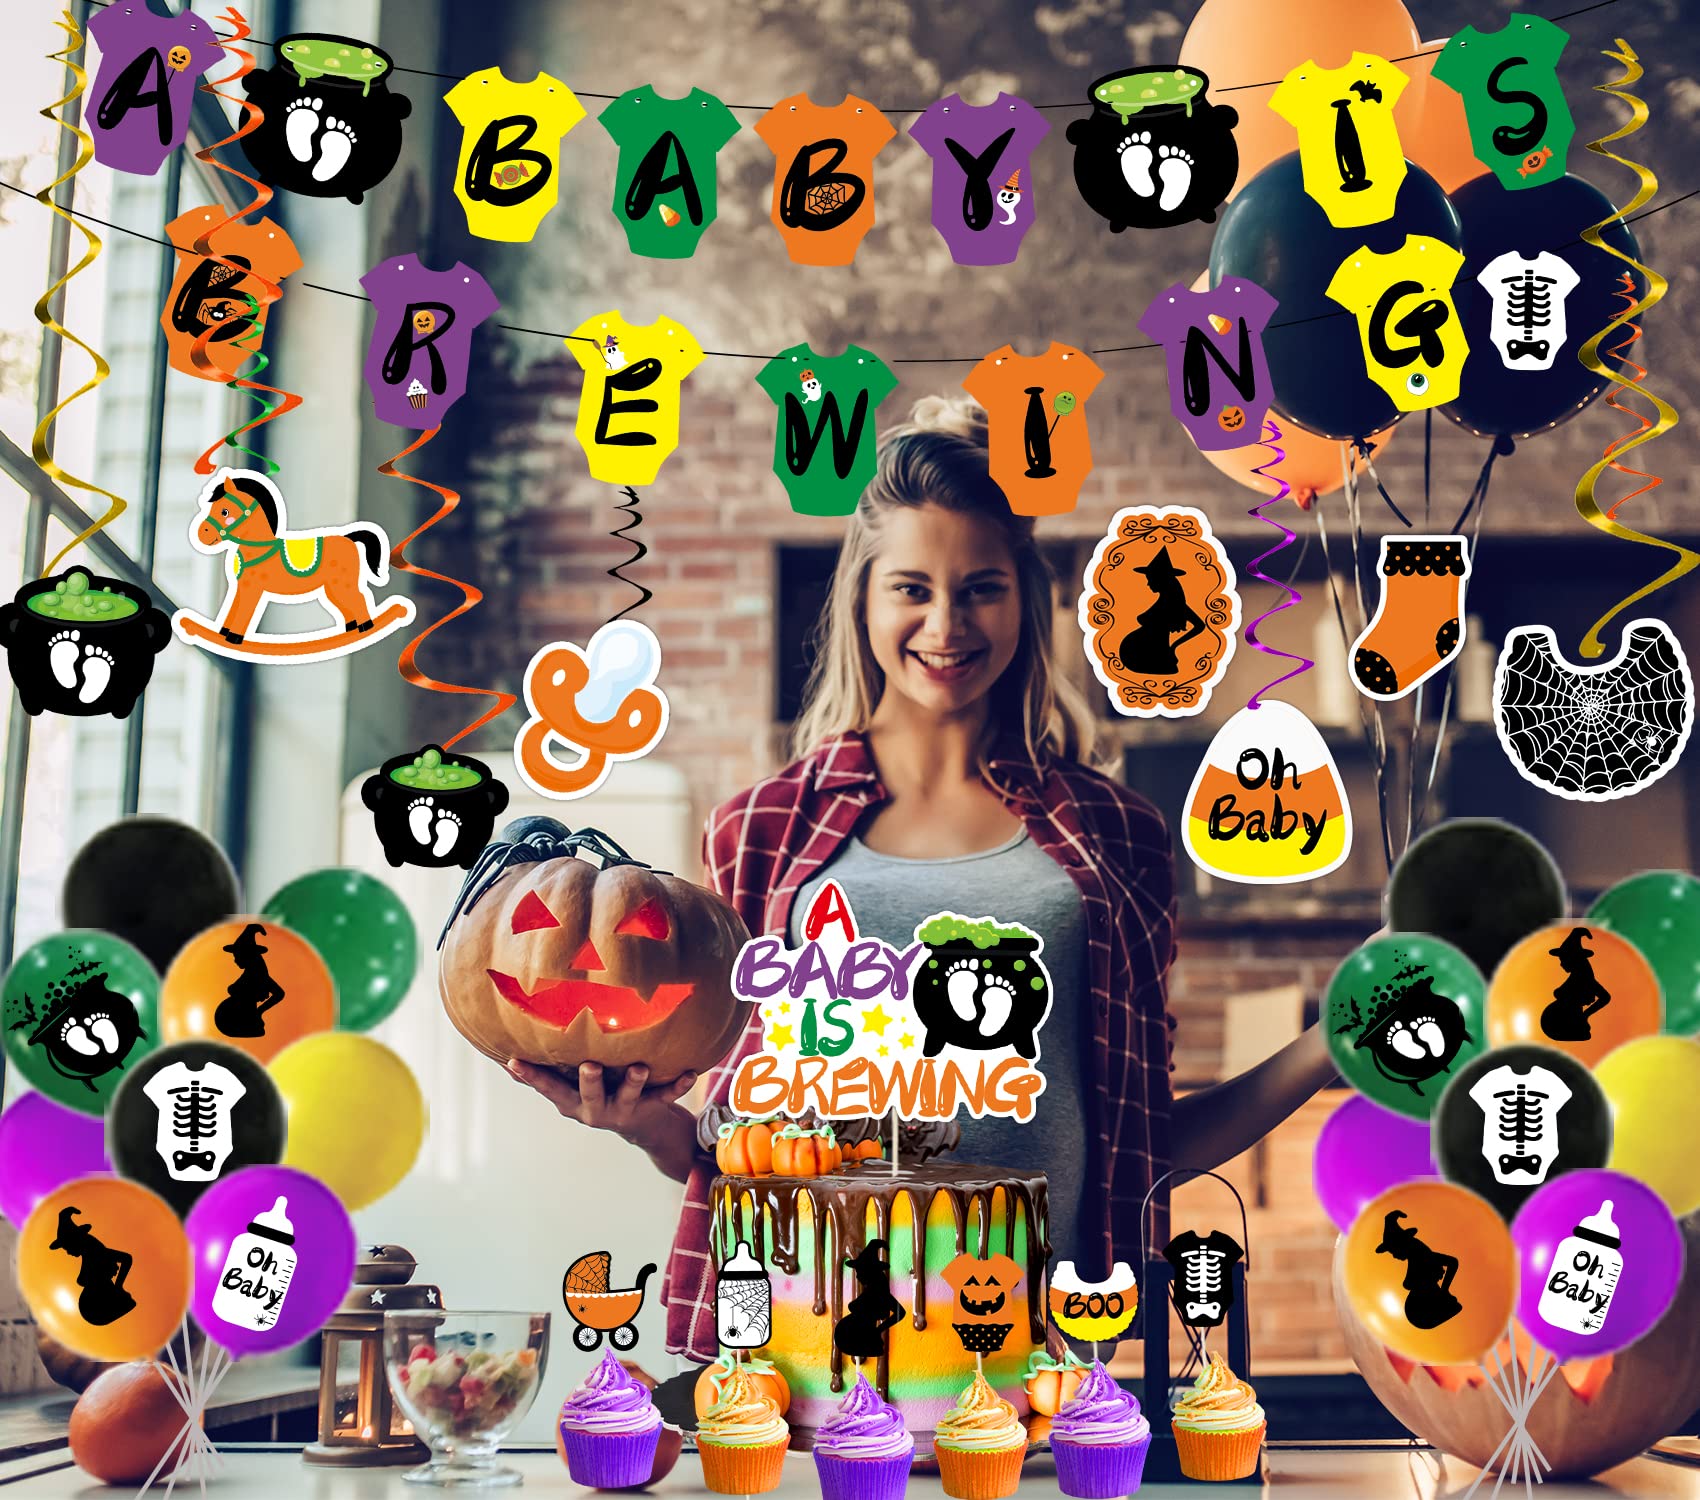 MISS FANTASY Hocus Pocus Decorations for Halloween Party Supplies